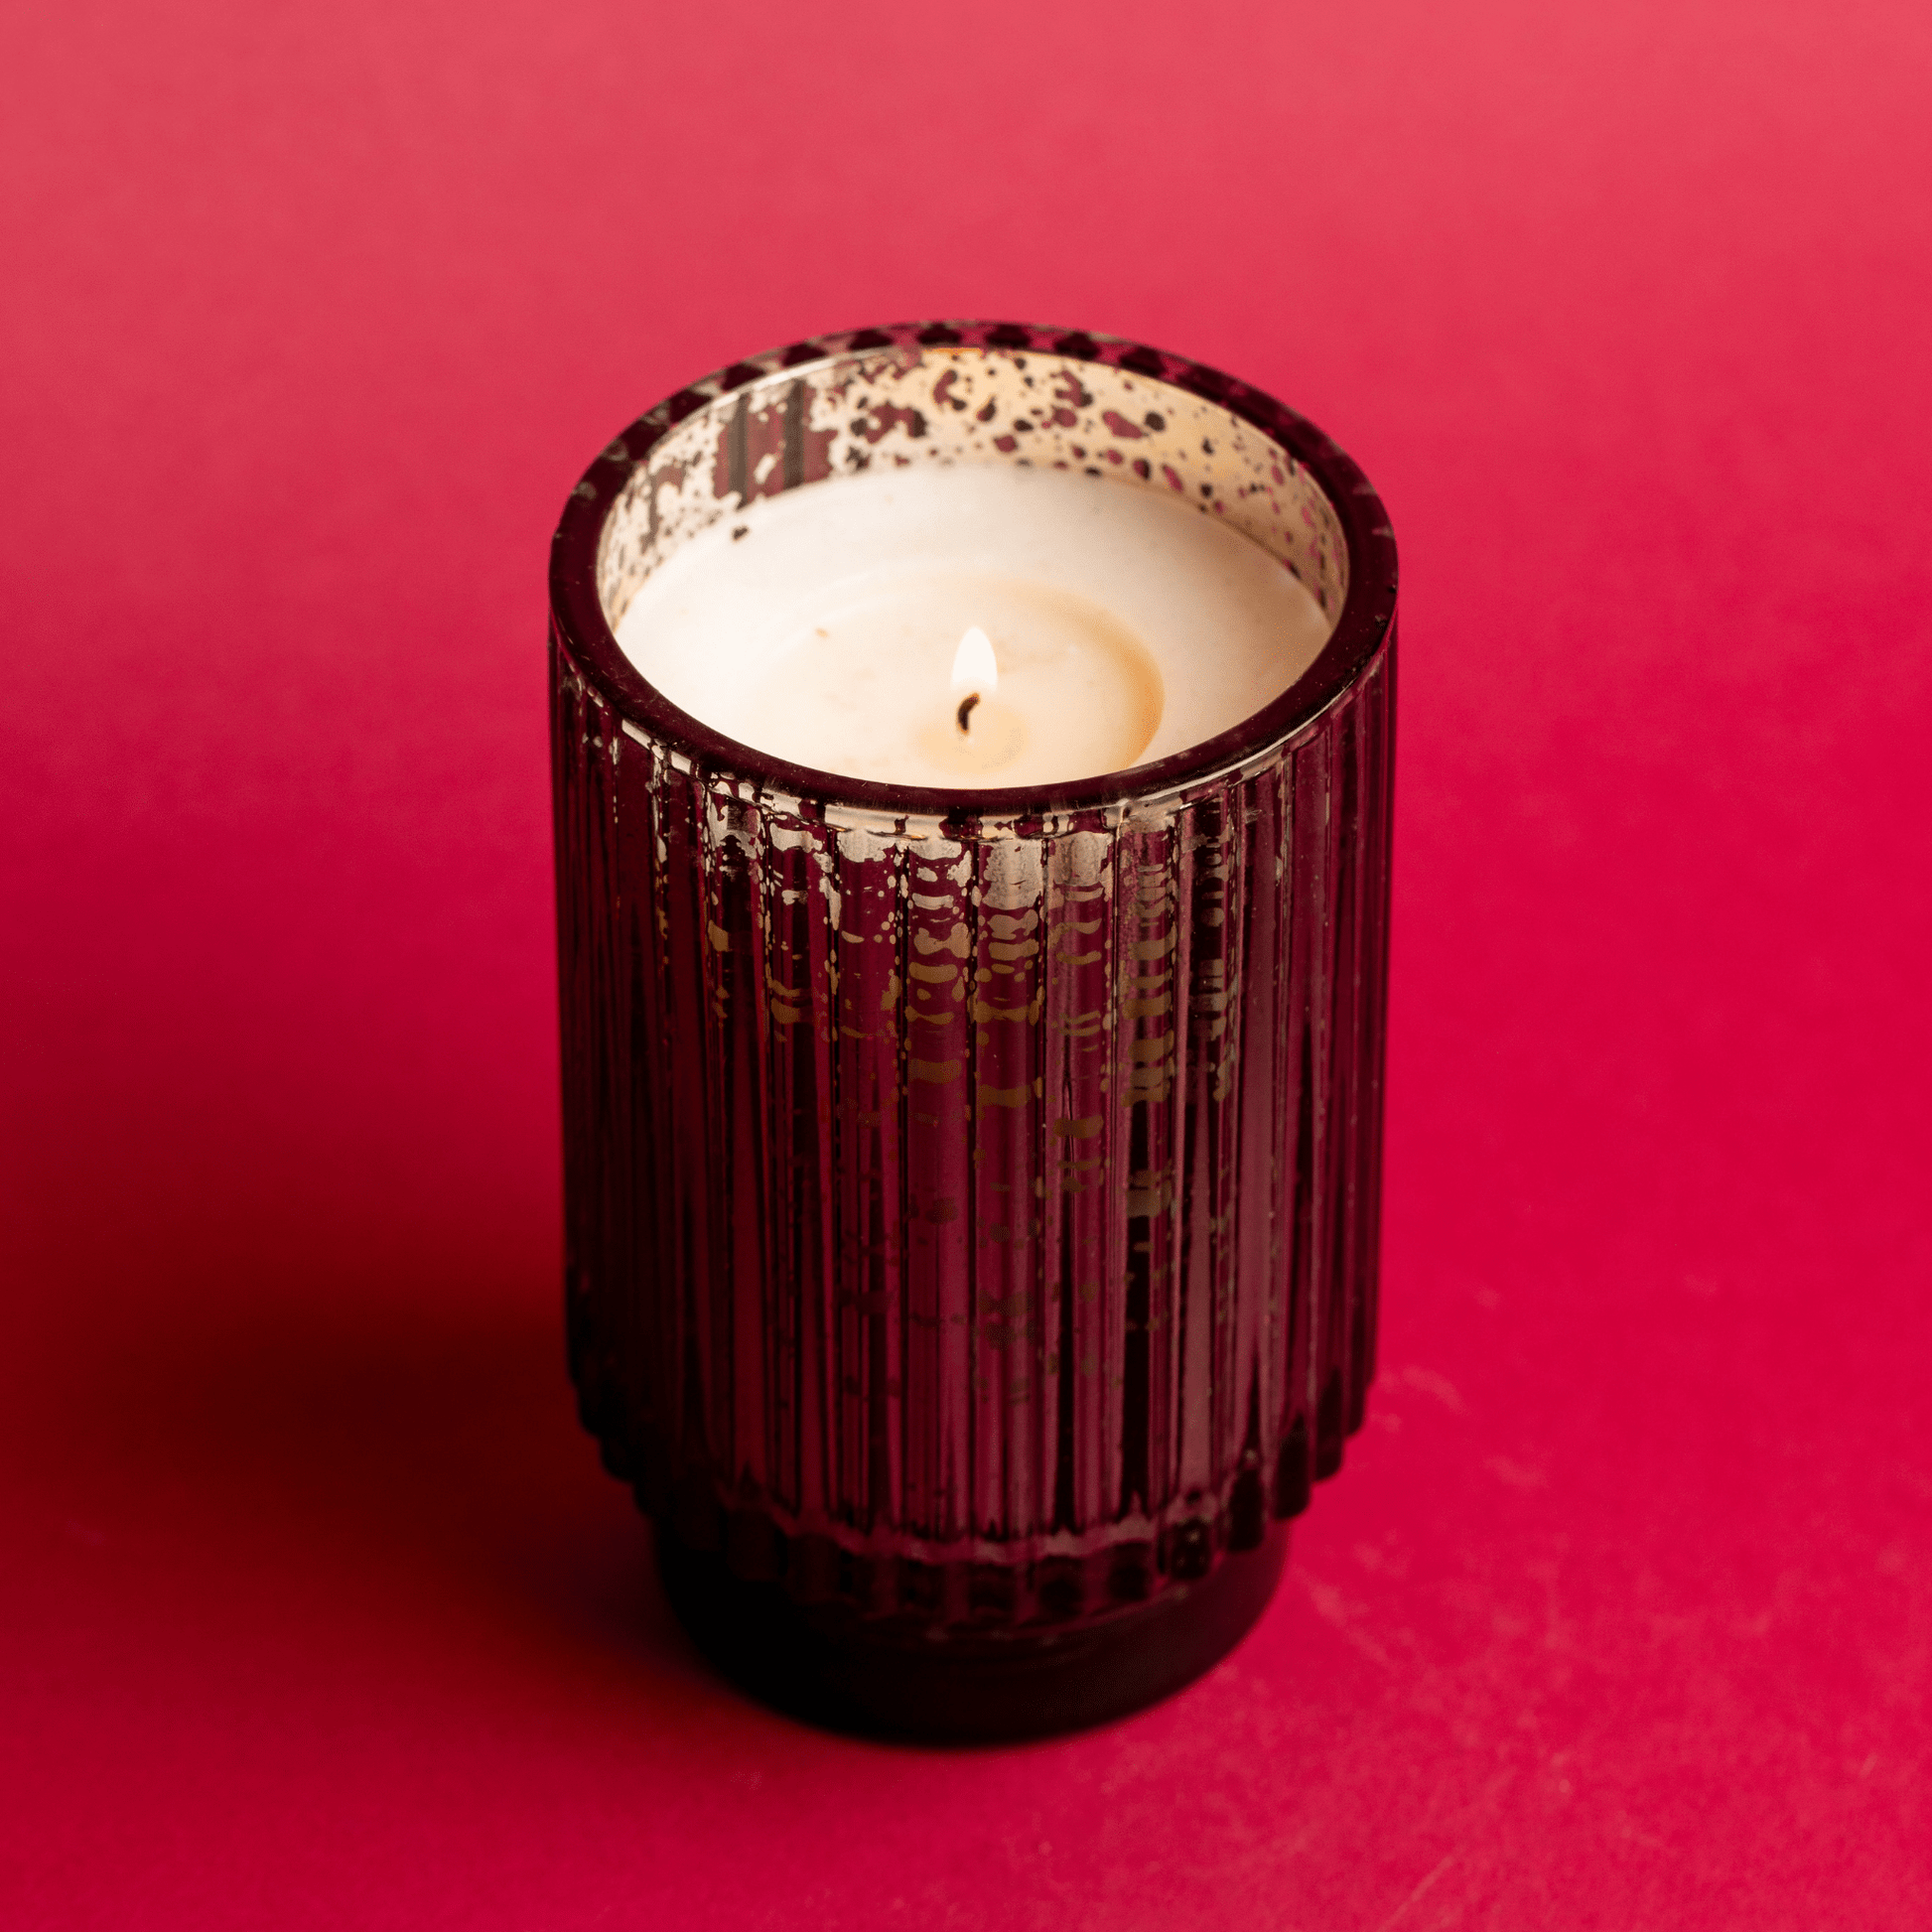 A lit 12 oz. tall mercury glass vessel on red background